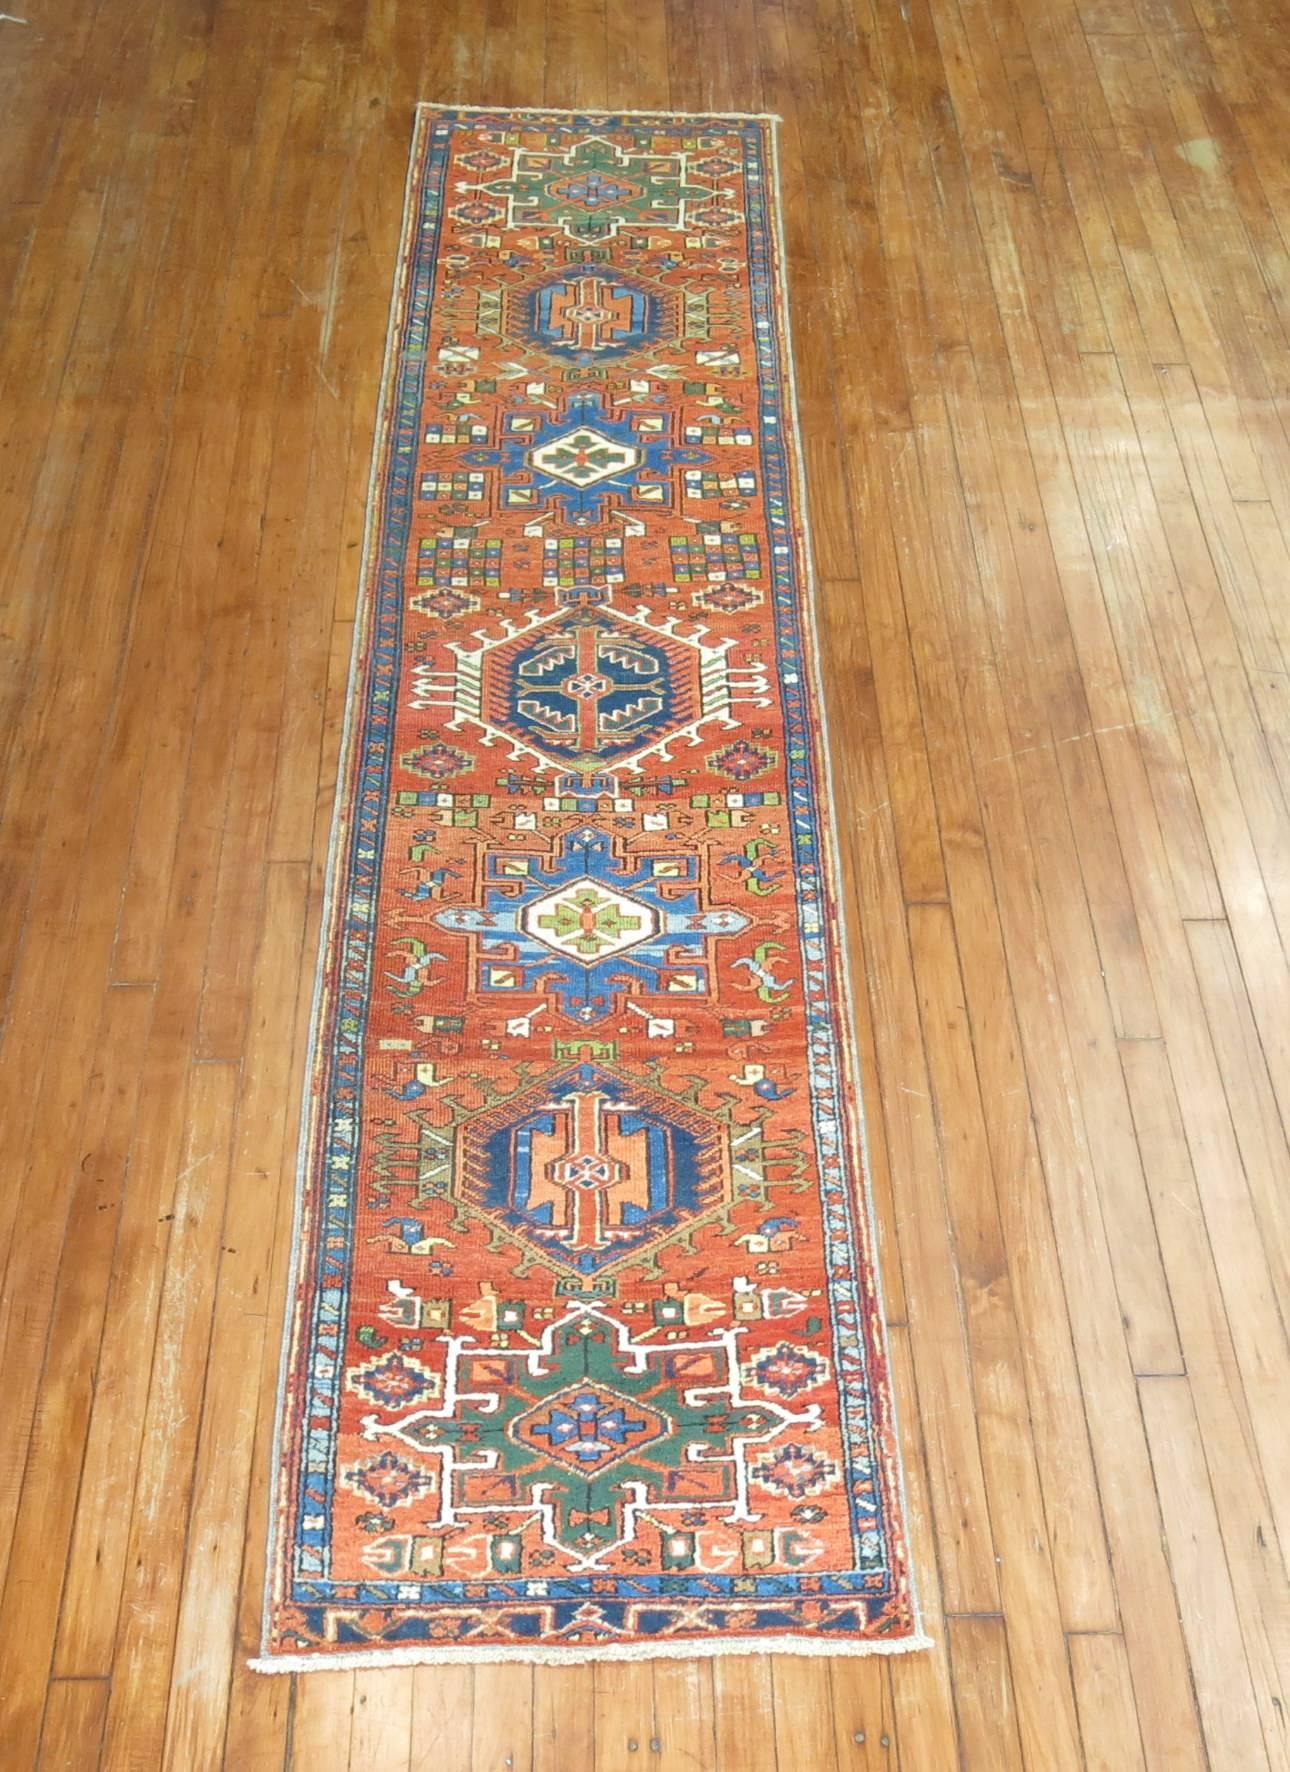 Narrow colorful Persian Heriz karadja runner

The best antique Heriz carpets are found in their design style and vivacious colors. The signature of a Heriz is the large medallion with over-scale corner pieces filled with angular oak leaves and